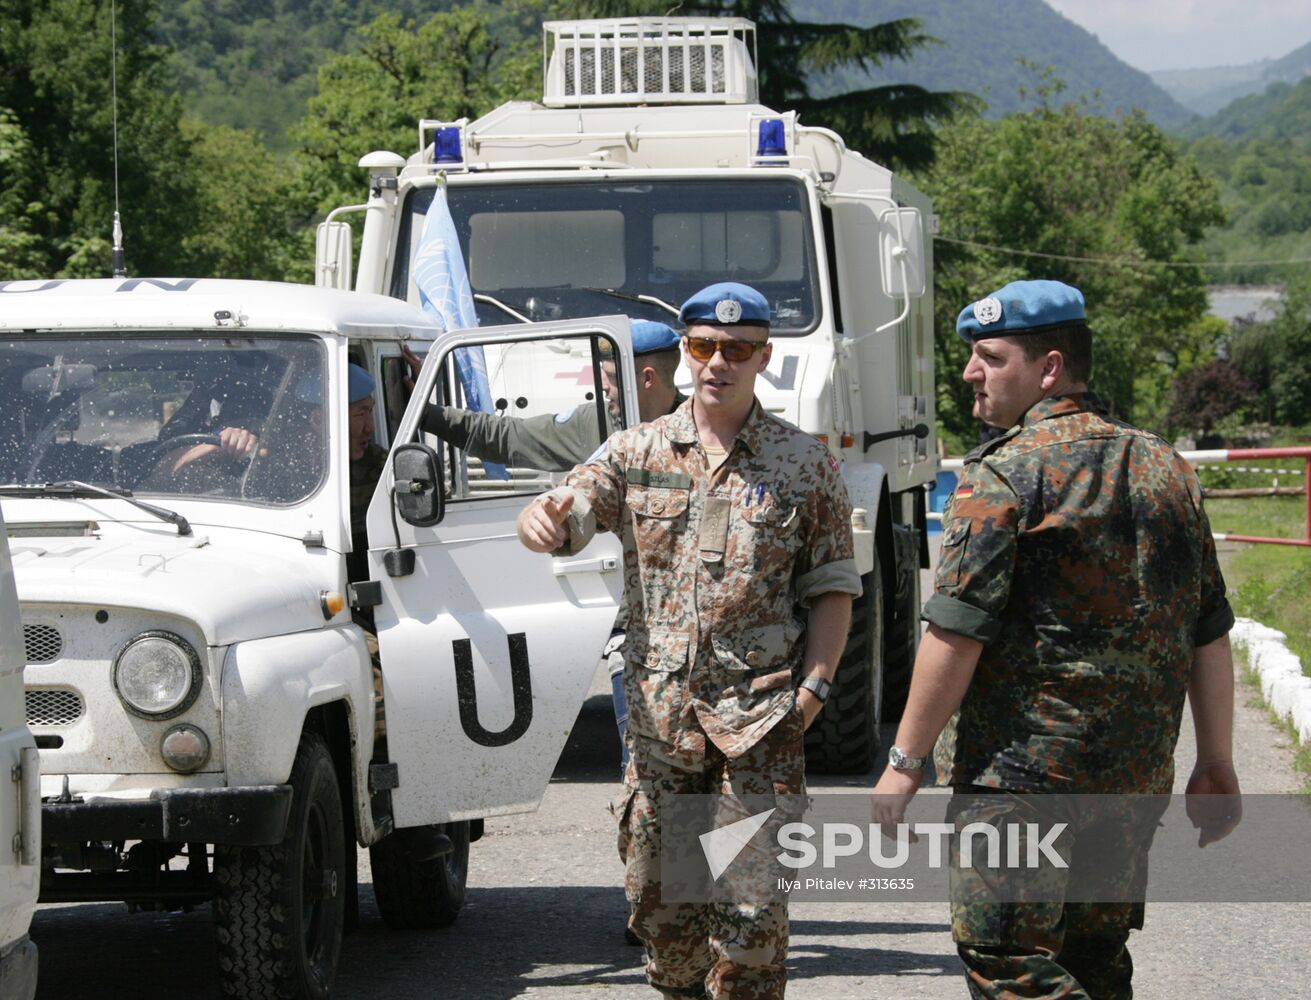 UN military observers and Russian peacekeeping troops in Abkhazia